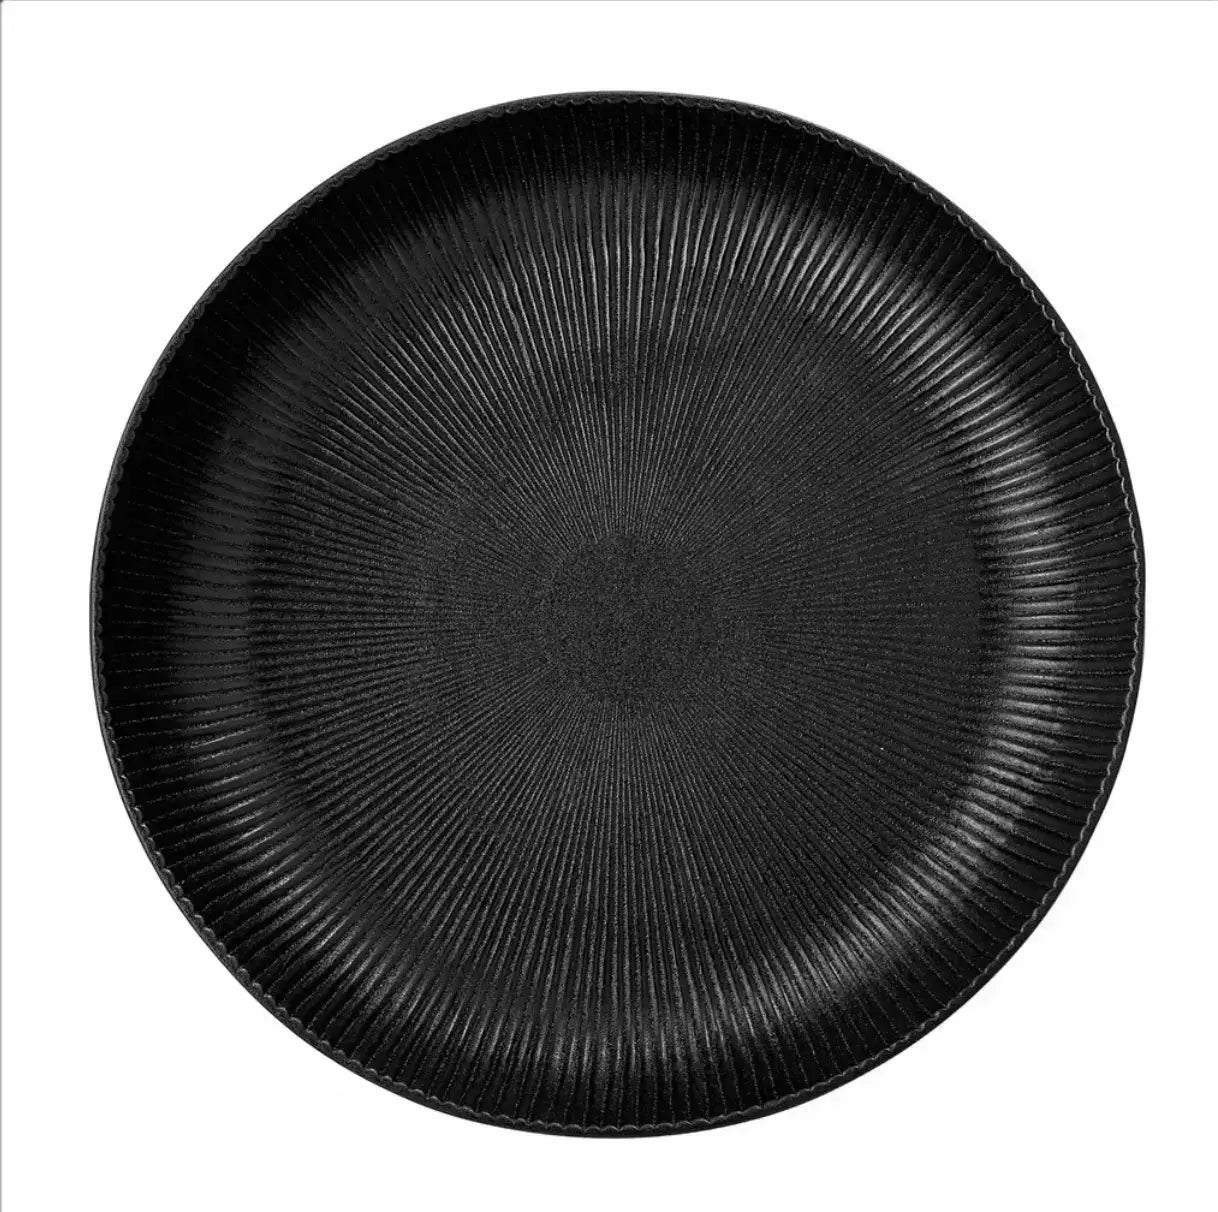 A black Neri Serving Bowl - Large on a white background, from French Bazaar.